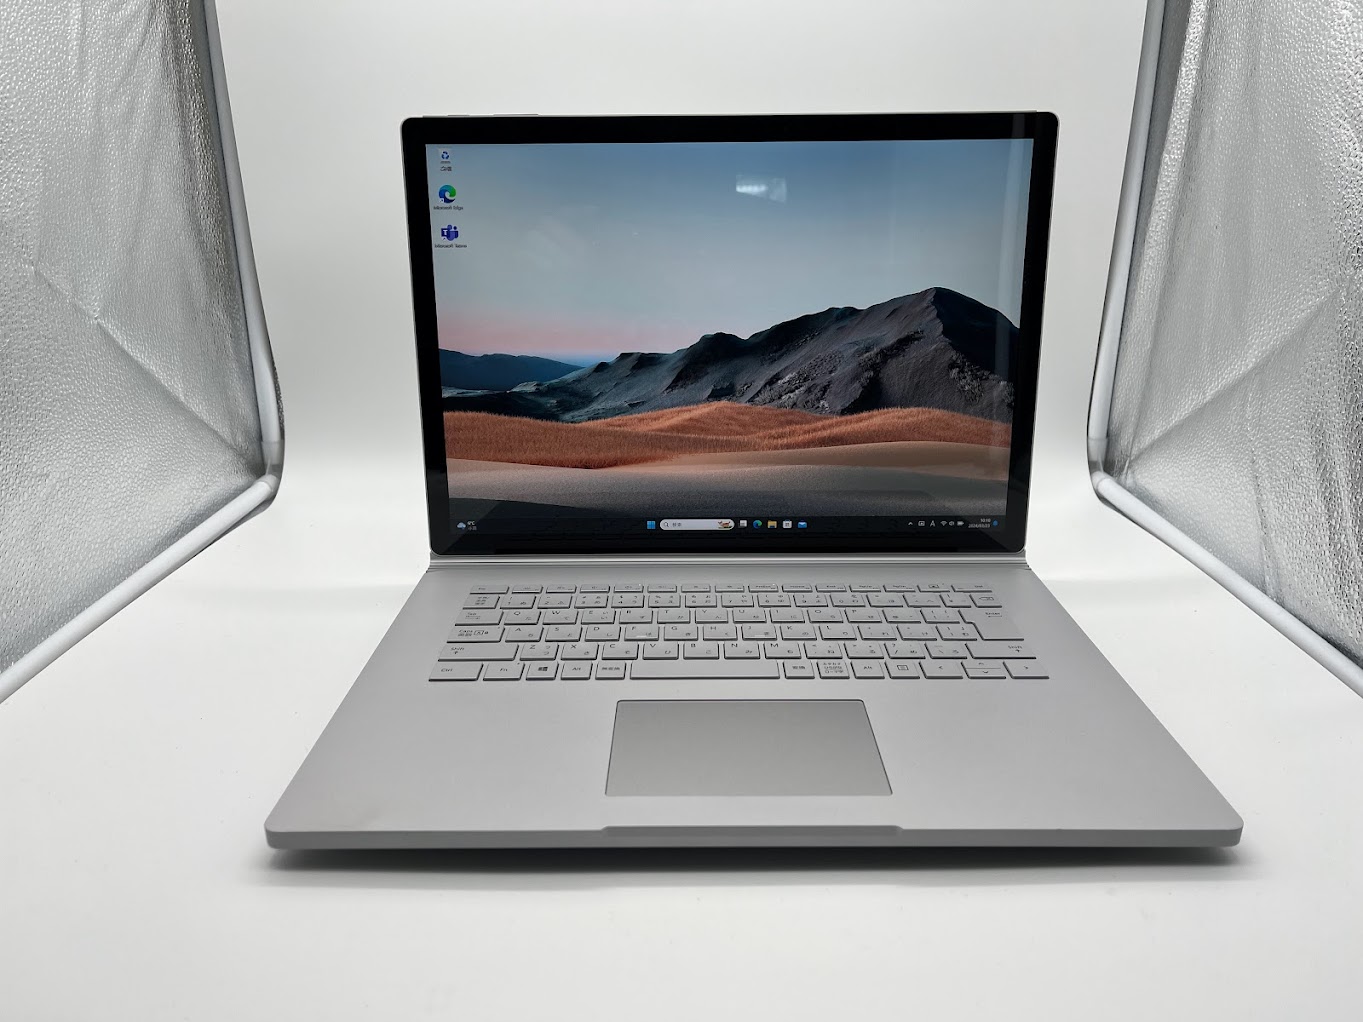 Microsoft(マイクロソフト) Surface Book 3 SLK-00018 1899